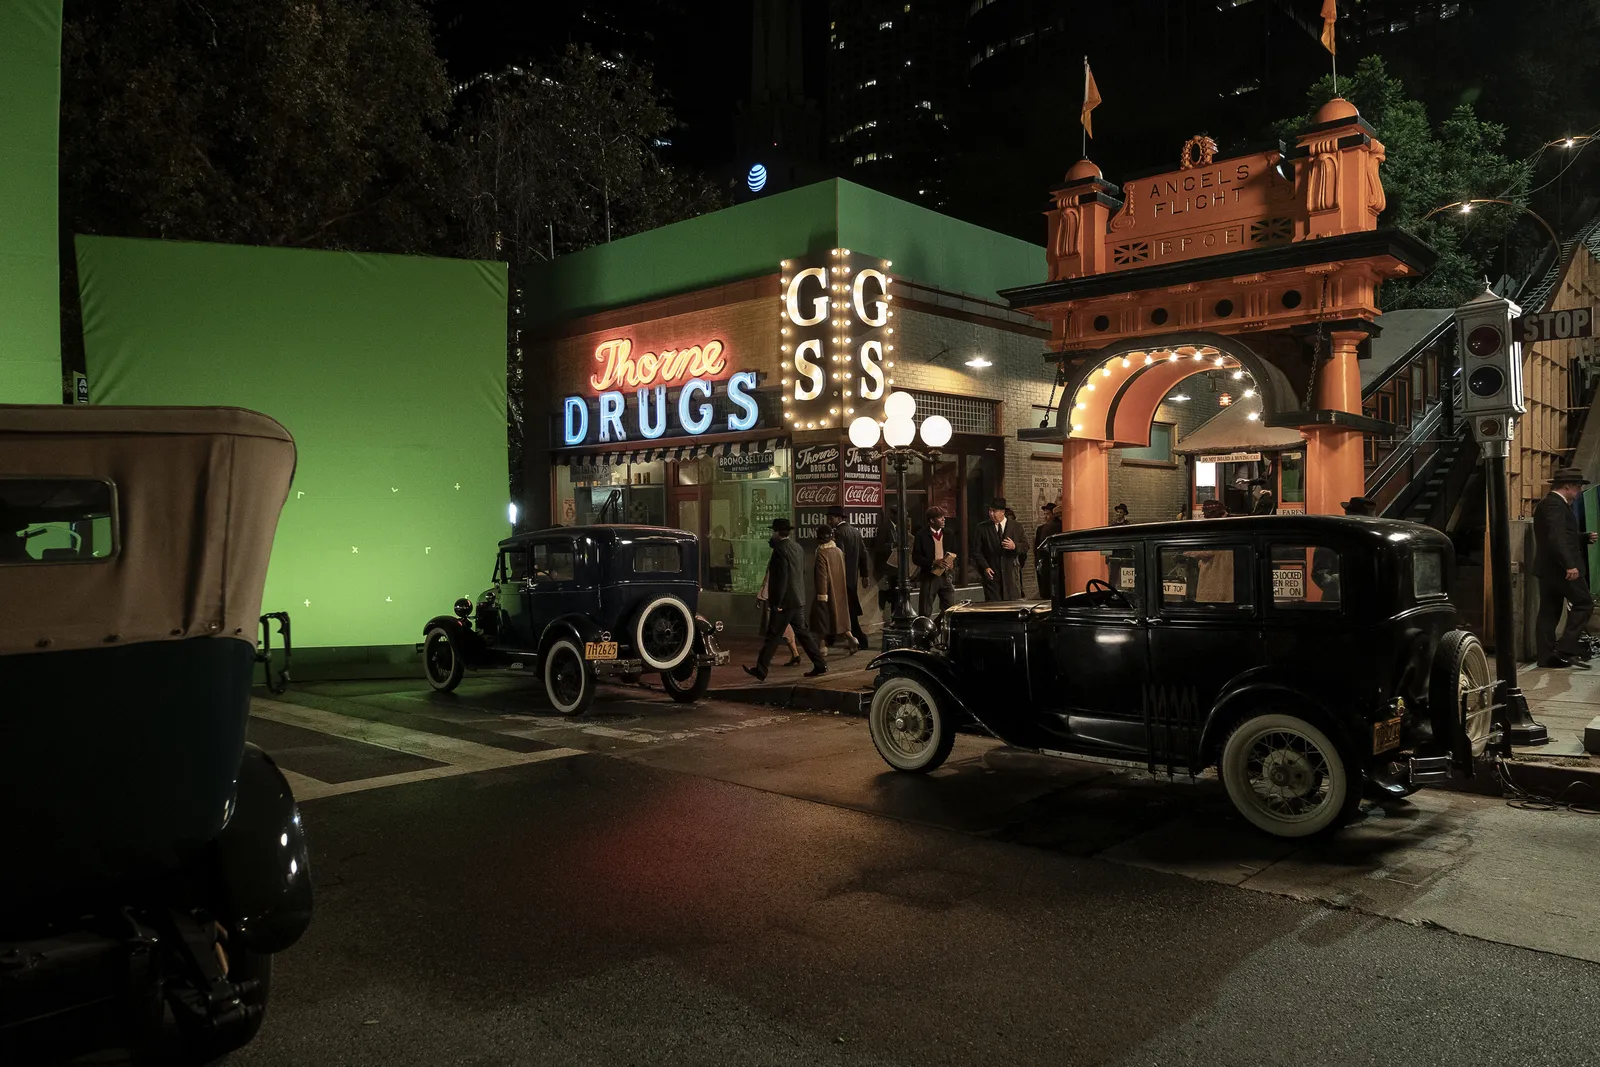 The designers recreated a townscape of the Angels Flight via a green screen and special effects. Perry Mason HBO series 2020